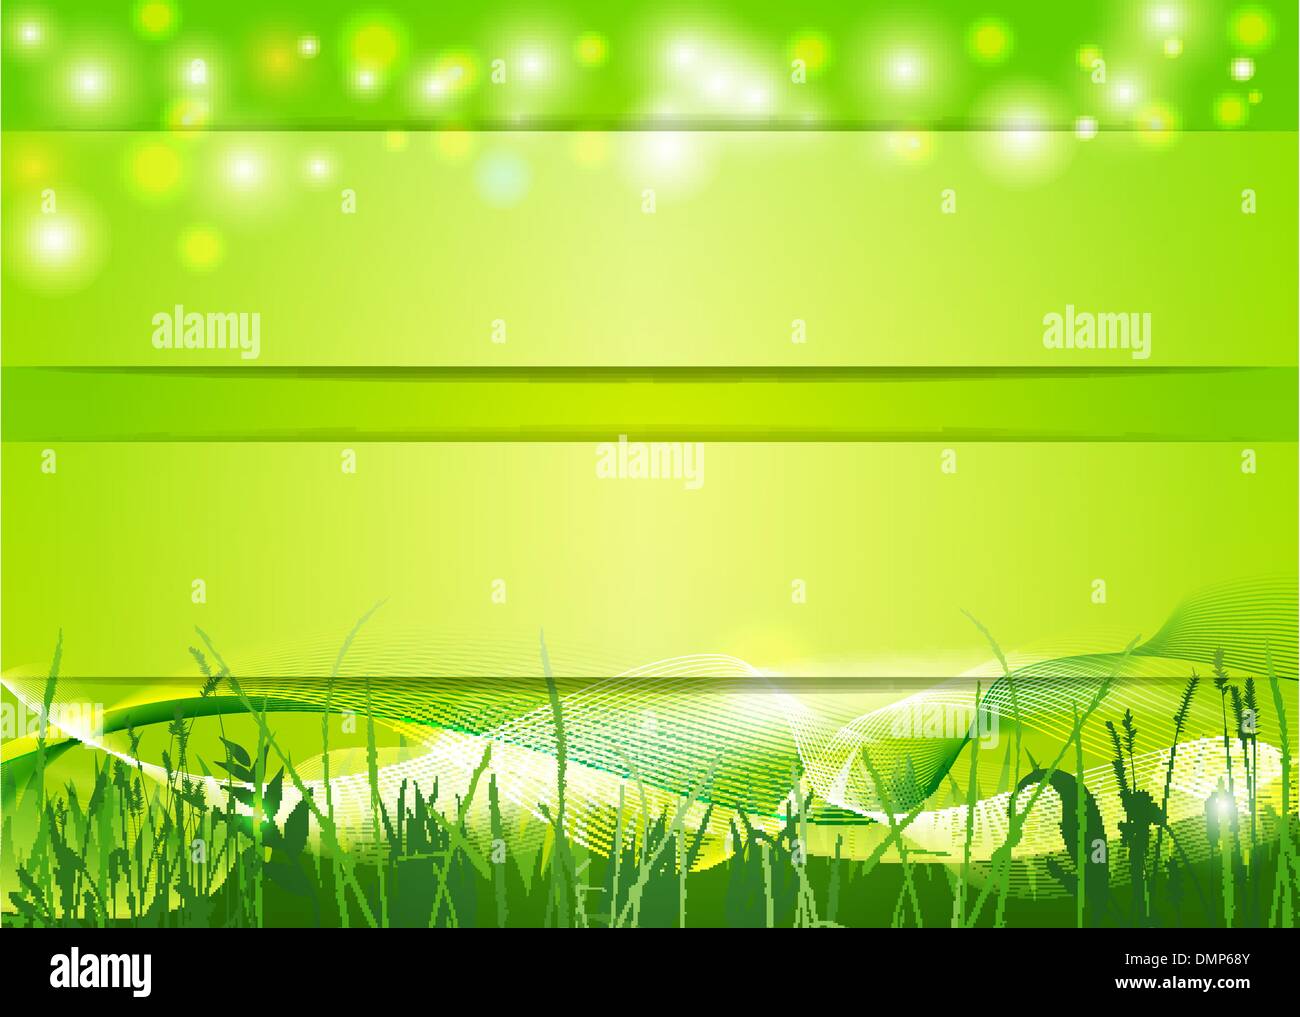 spring background Stock Vector